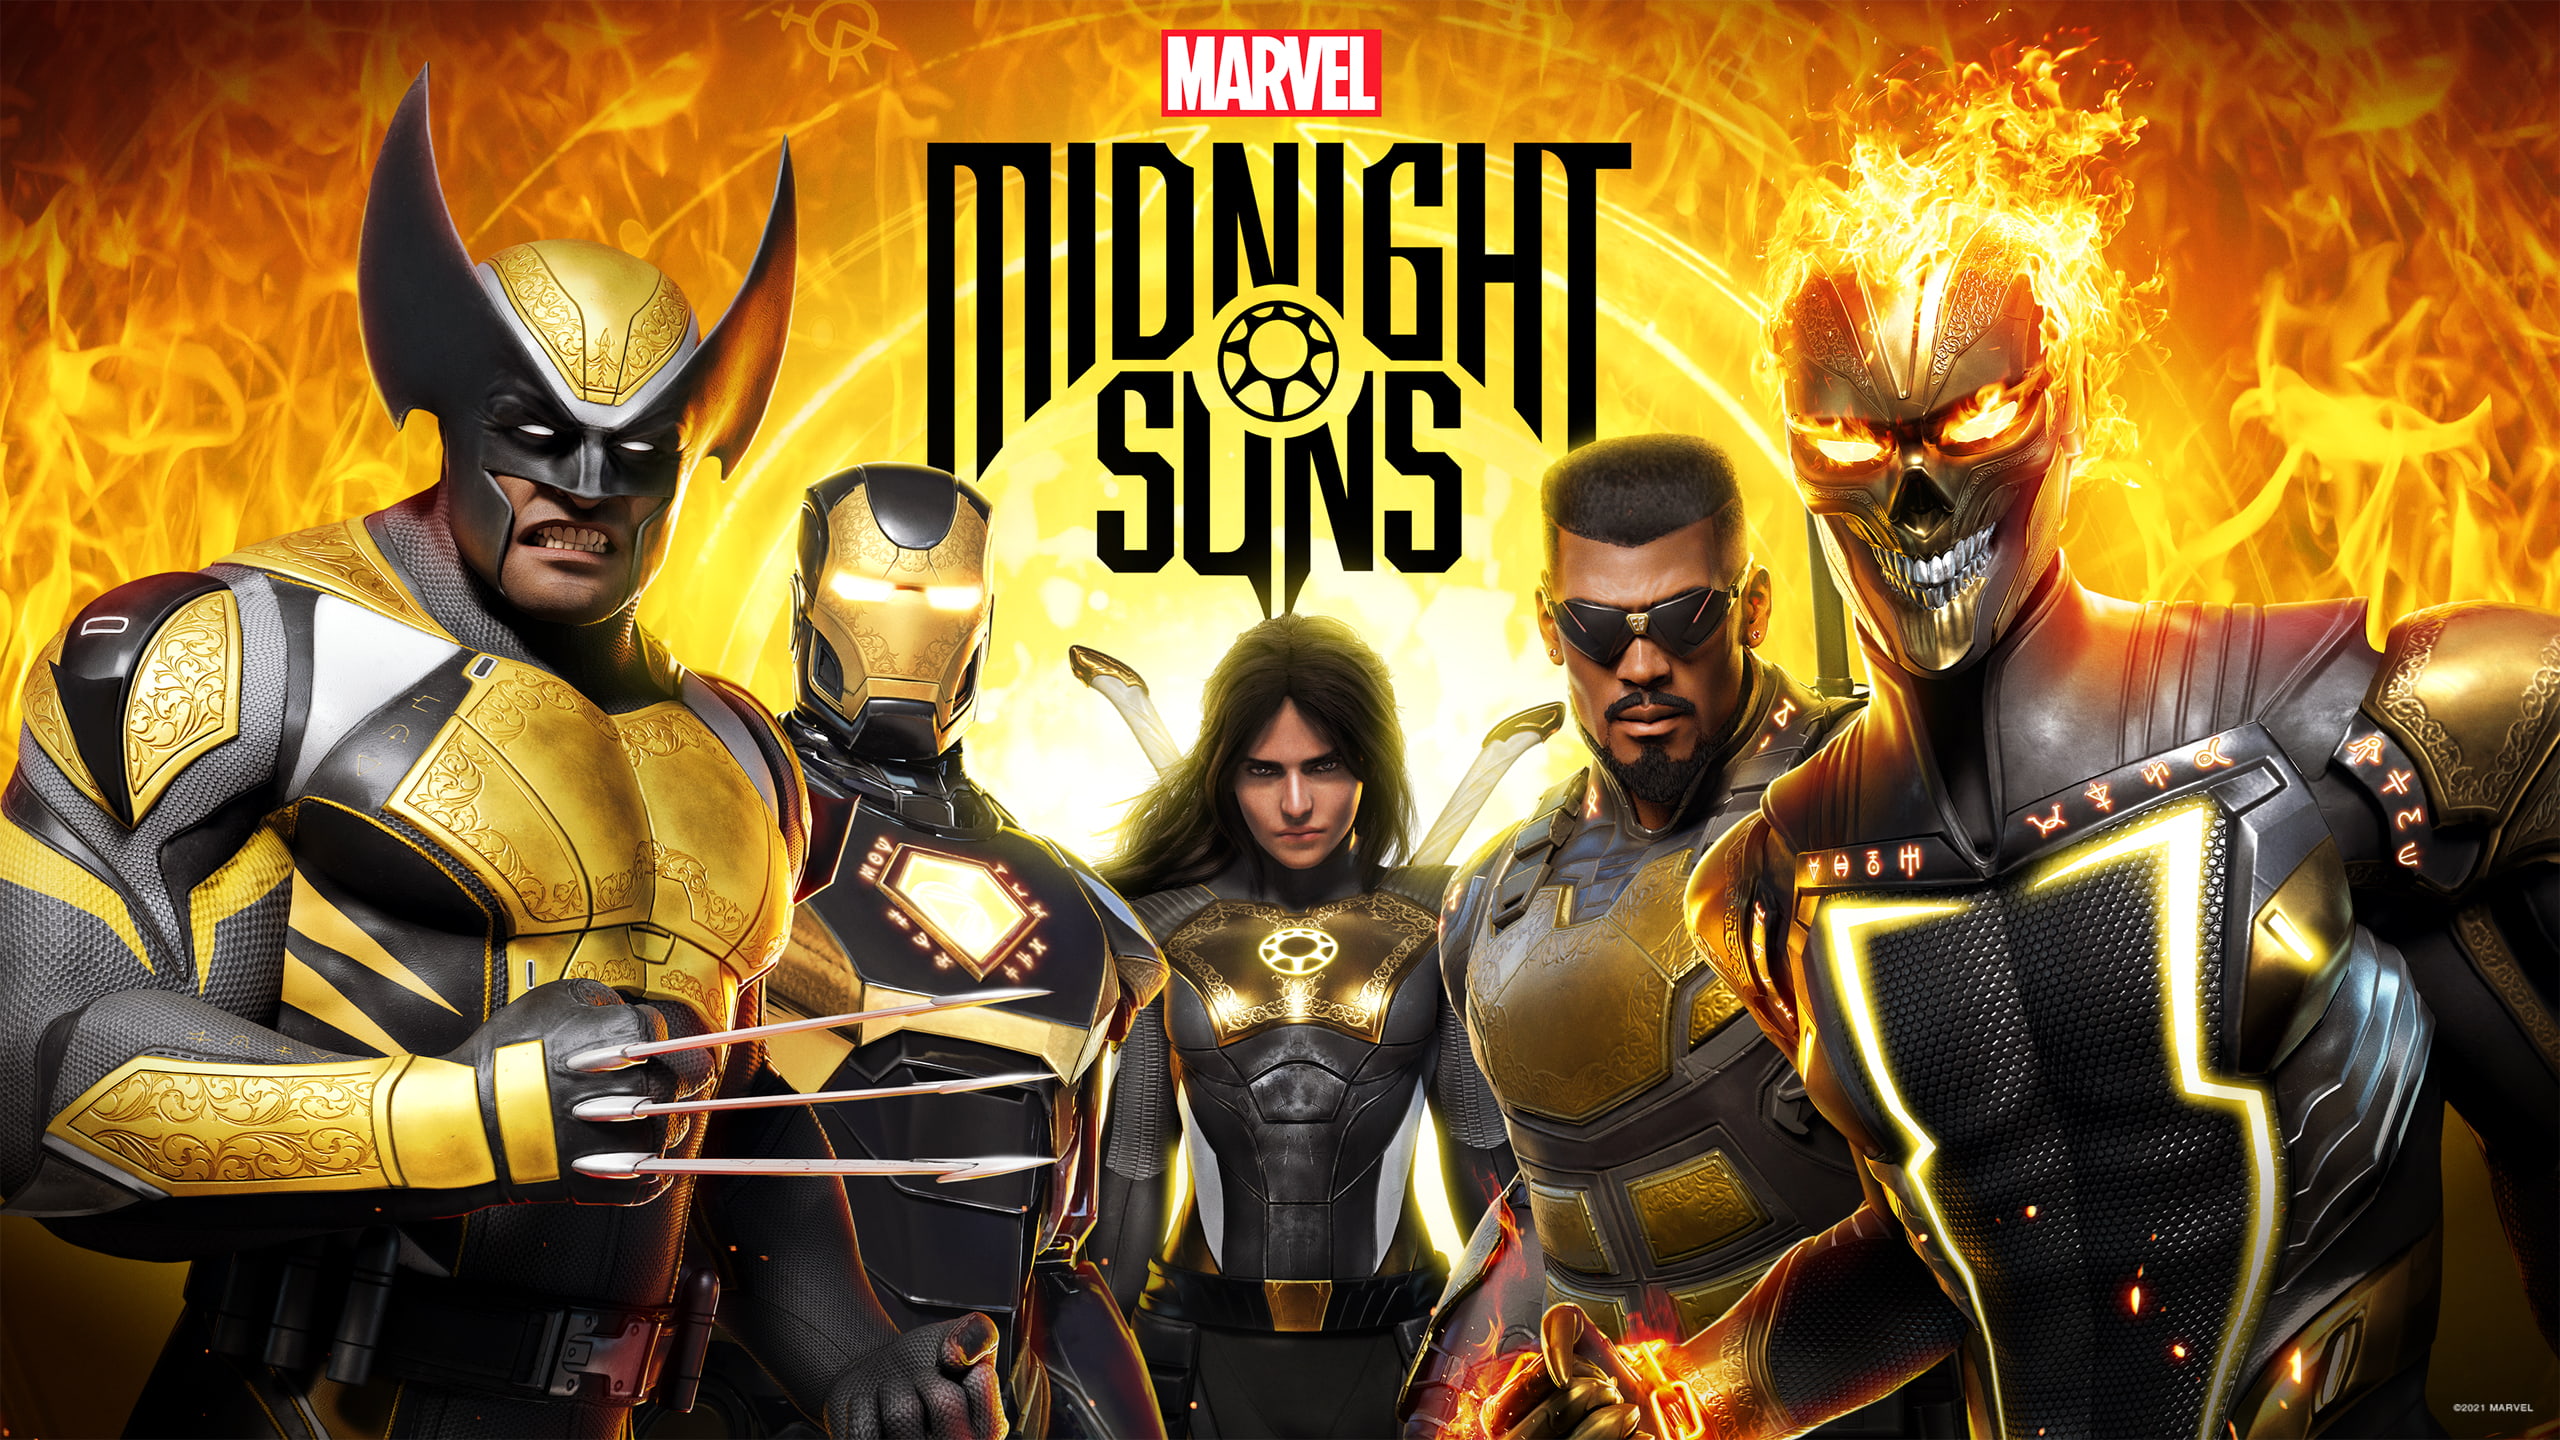 marvel's midnight suns will last 40 to 60 hours